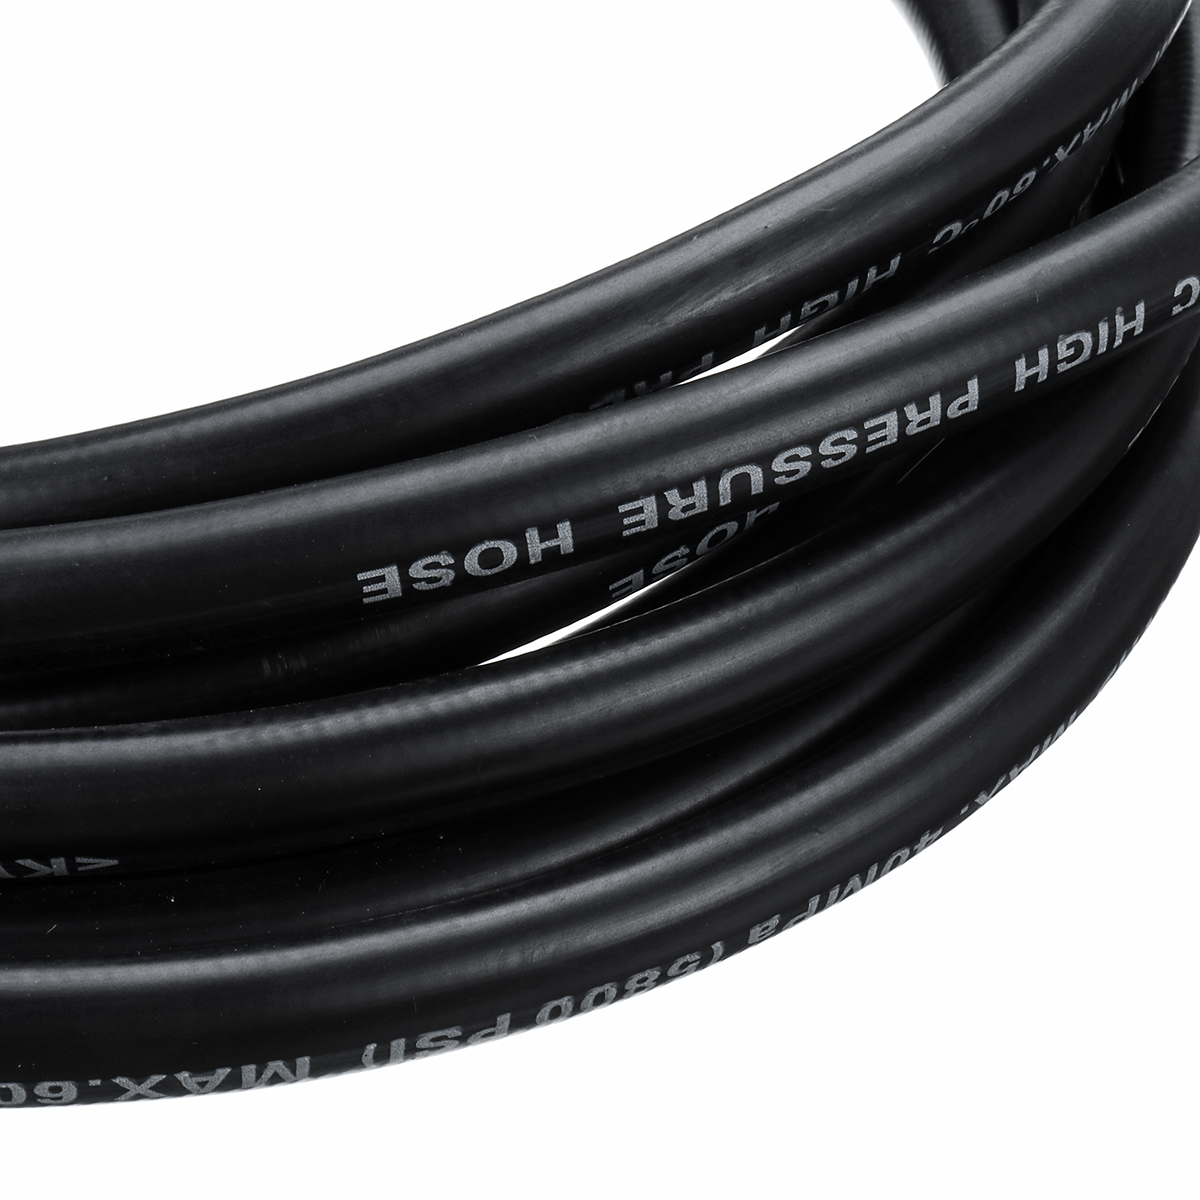 5M-5800PSI-High-Pressure-Washer-Hose-Pipe-Drain-Sewer-Cleaning-Hose-for-Car-Garden-Water-Washer-1558770-7